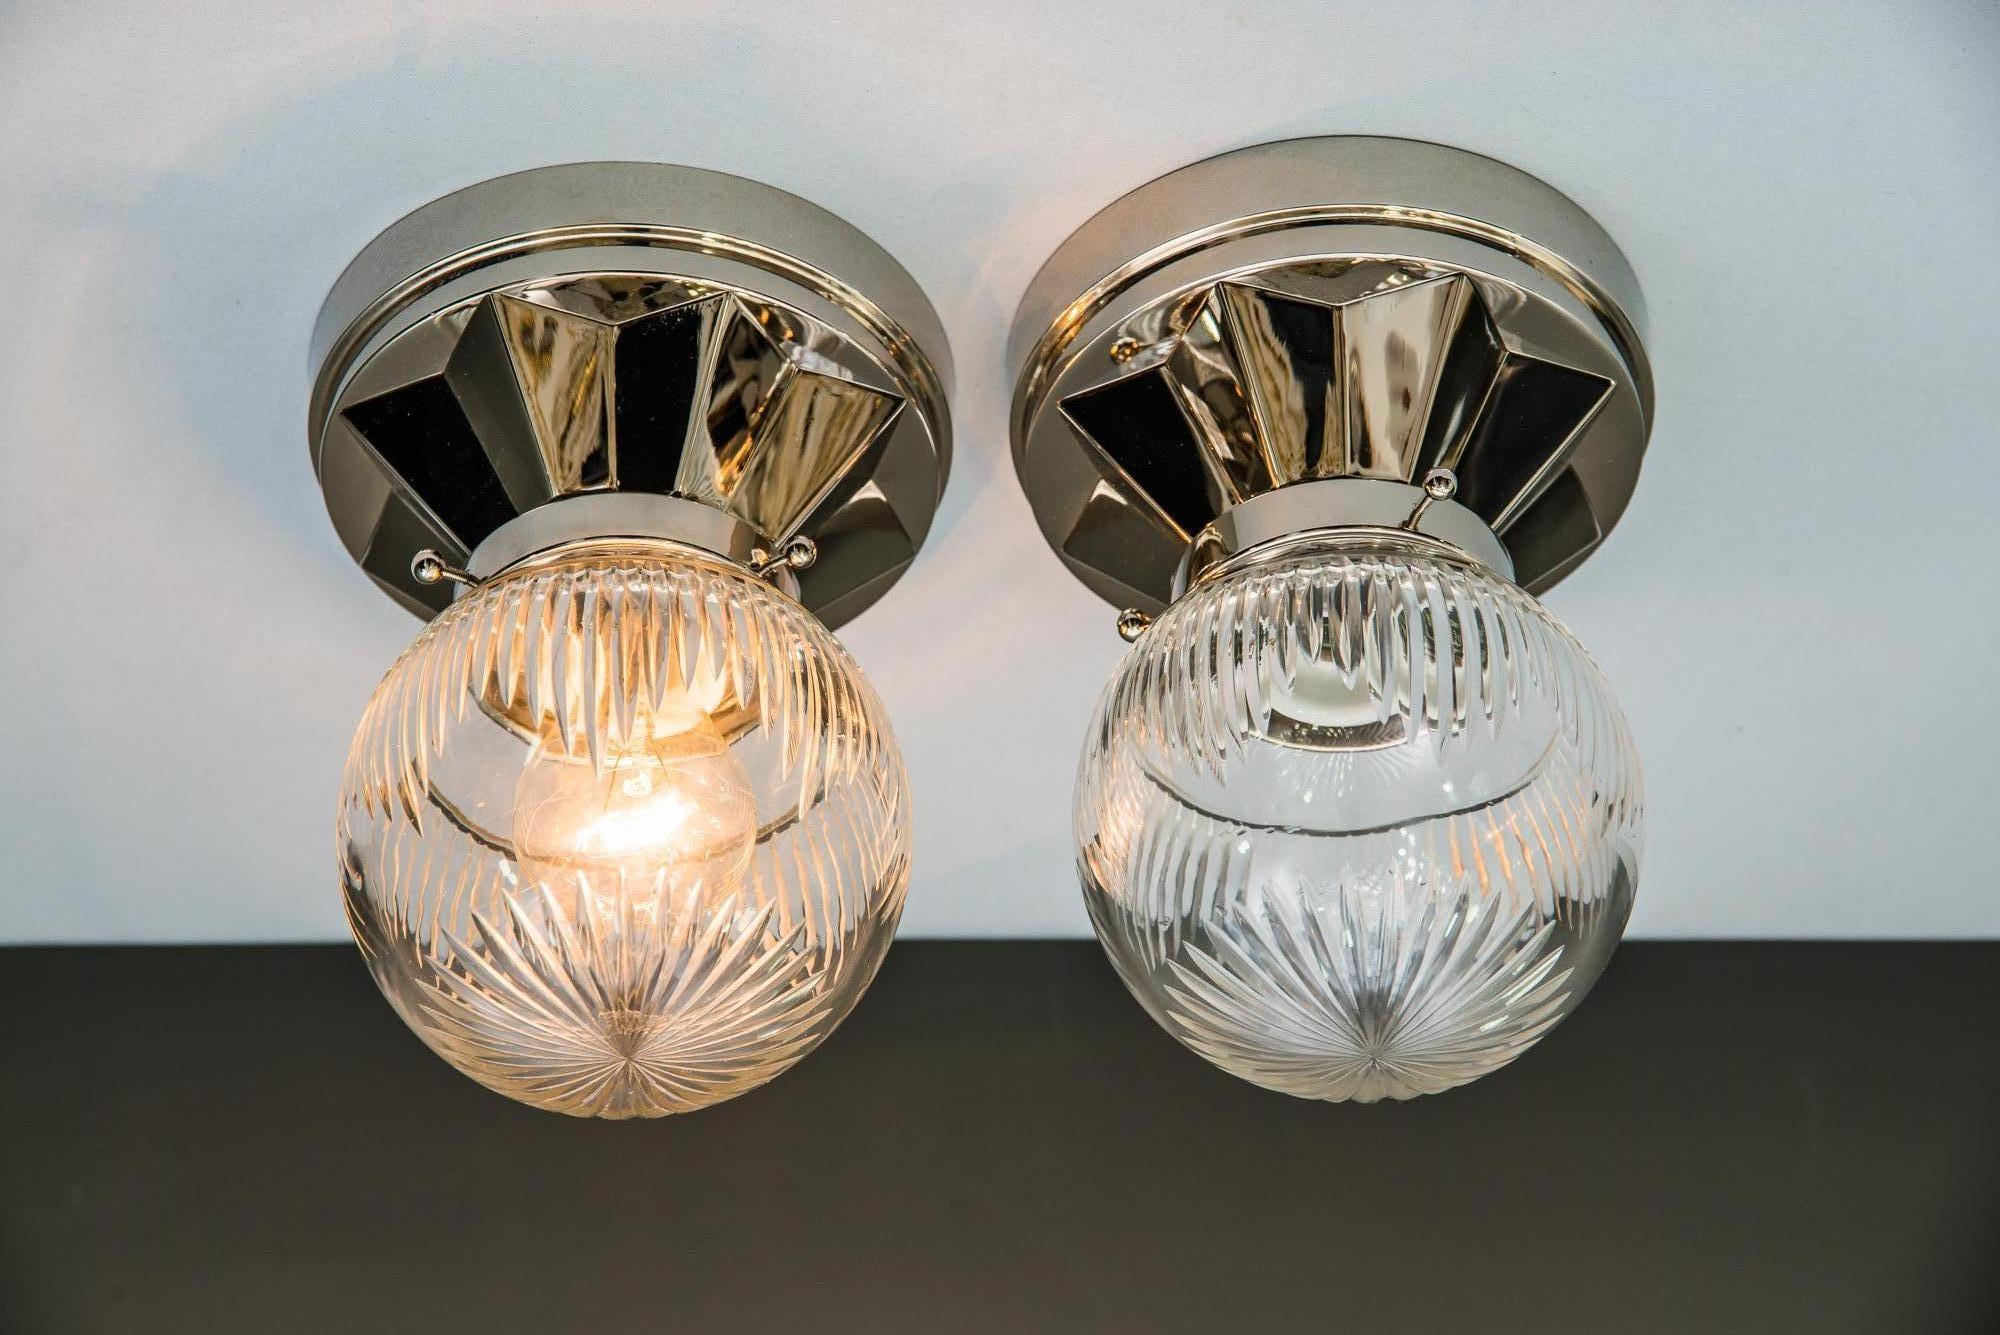 Two nickel plated Art Deco ceiling lamps, circa 1920s
Original old glasses.